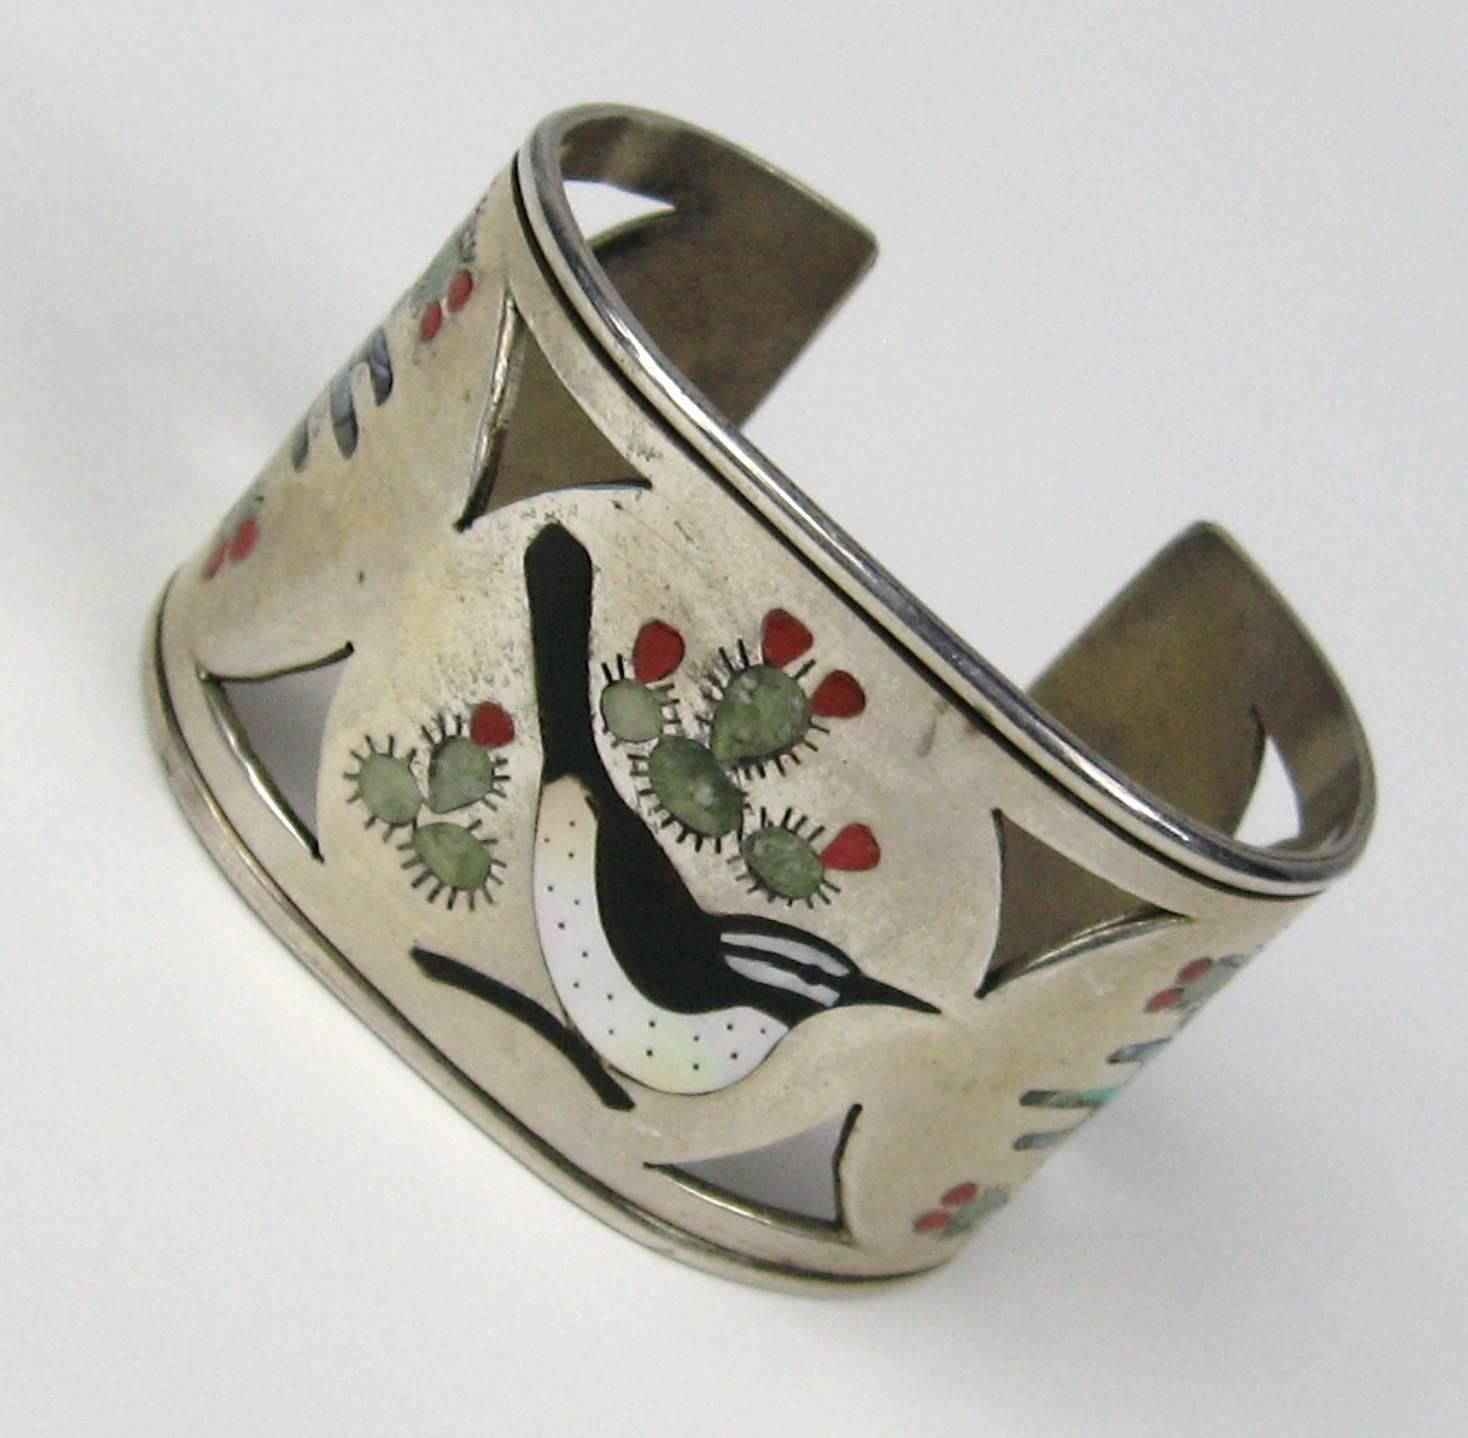 Lovely inlaid Zuni cuff depicting a Bird with Cactus Nice wide cuff. Measuring 1.65 in wide Opening 1.05 in will fit a 6 to 7 wrist, does have some give to be made smaller or larger. This is out of a massive collection of Hopi, Zuni, Navajo,